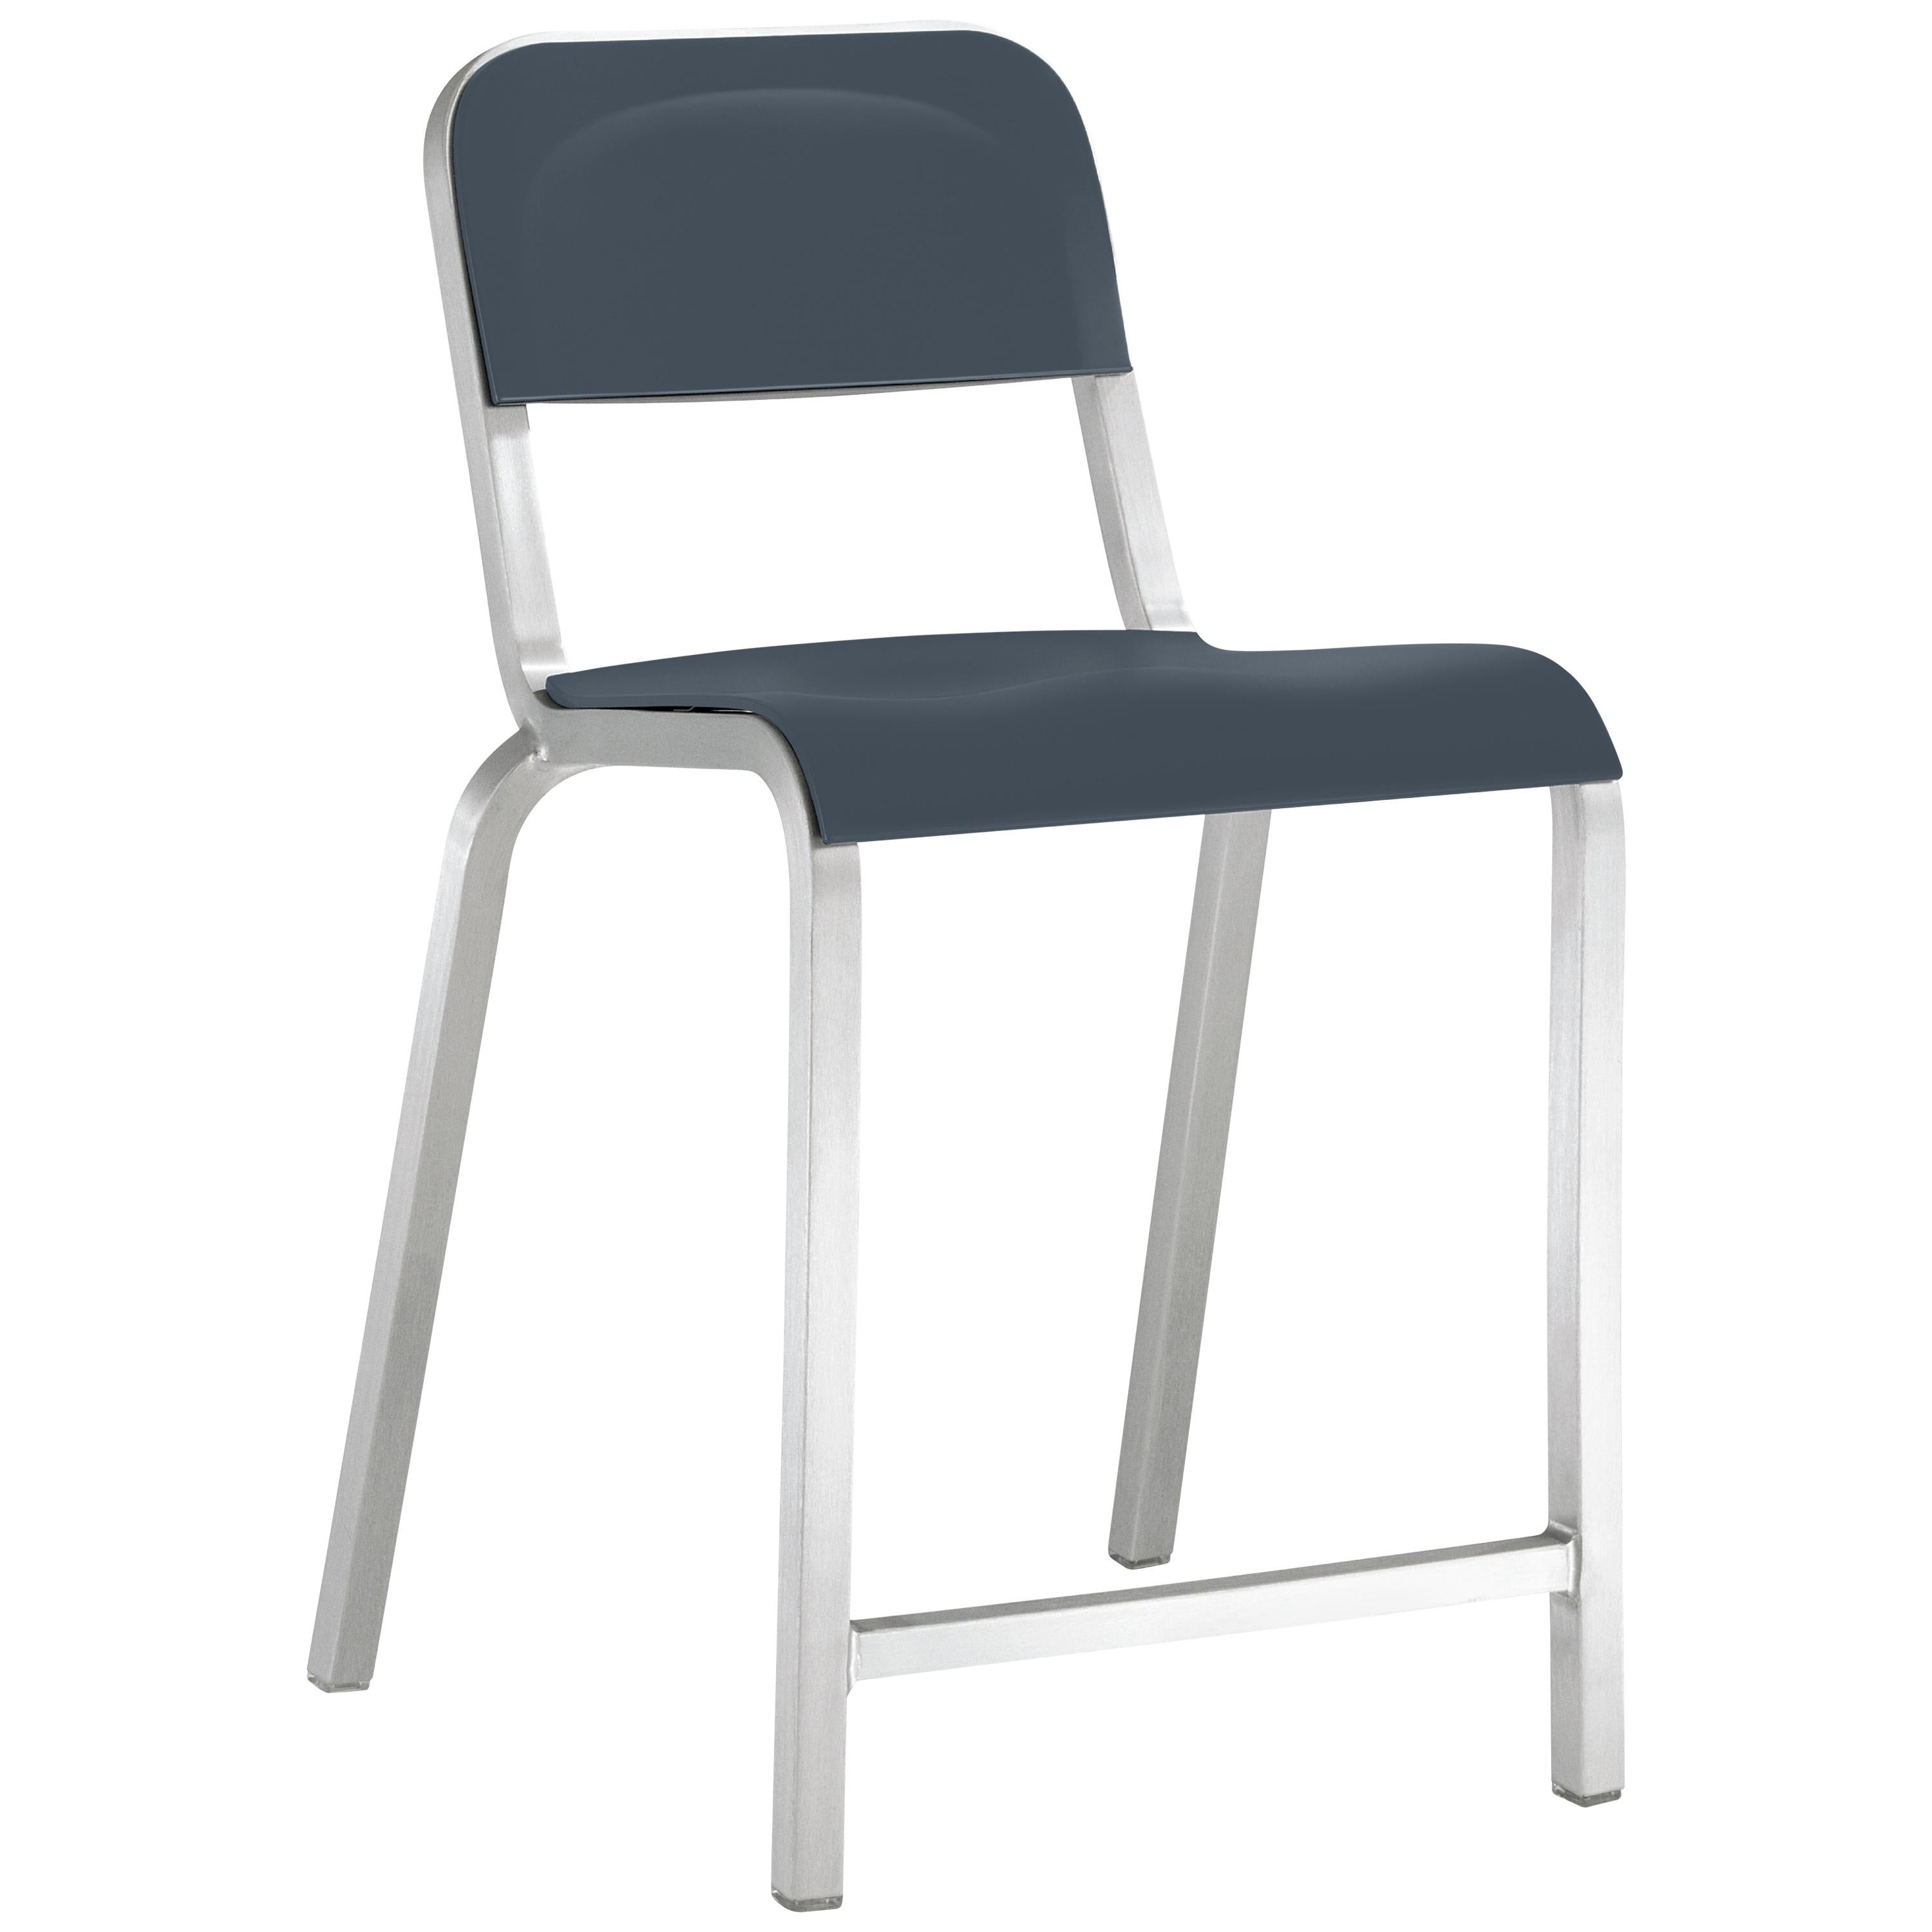 Emeco 1951 Aluminum Counter Stool with Dark Blue Seat by Adrian Van Hooydonk For Sale